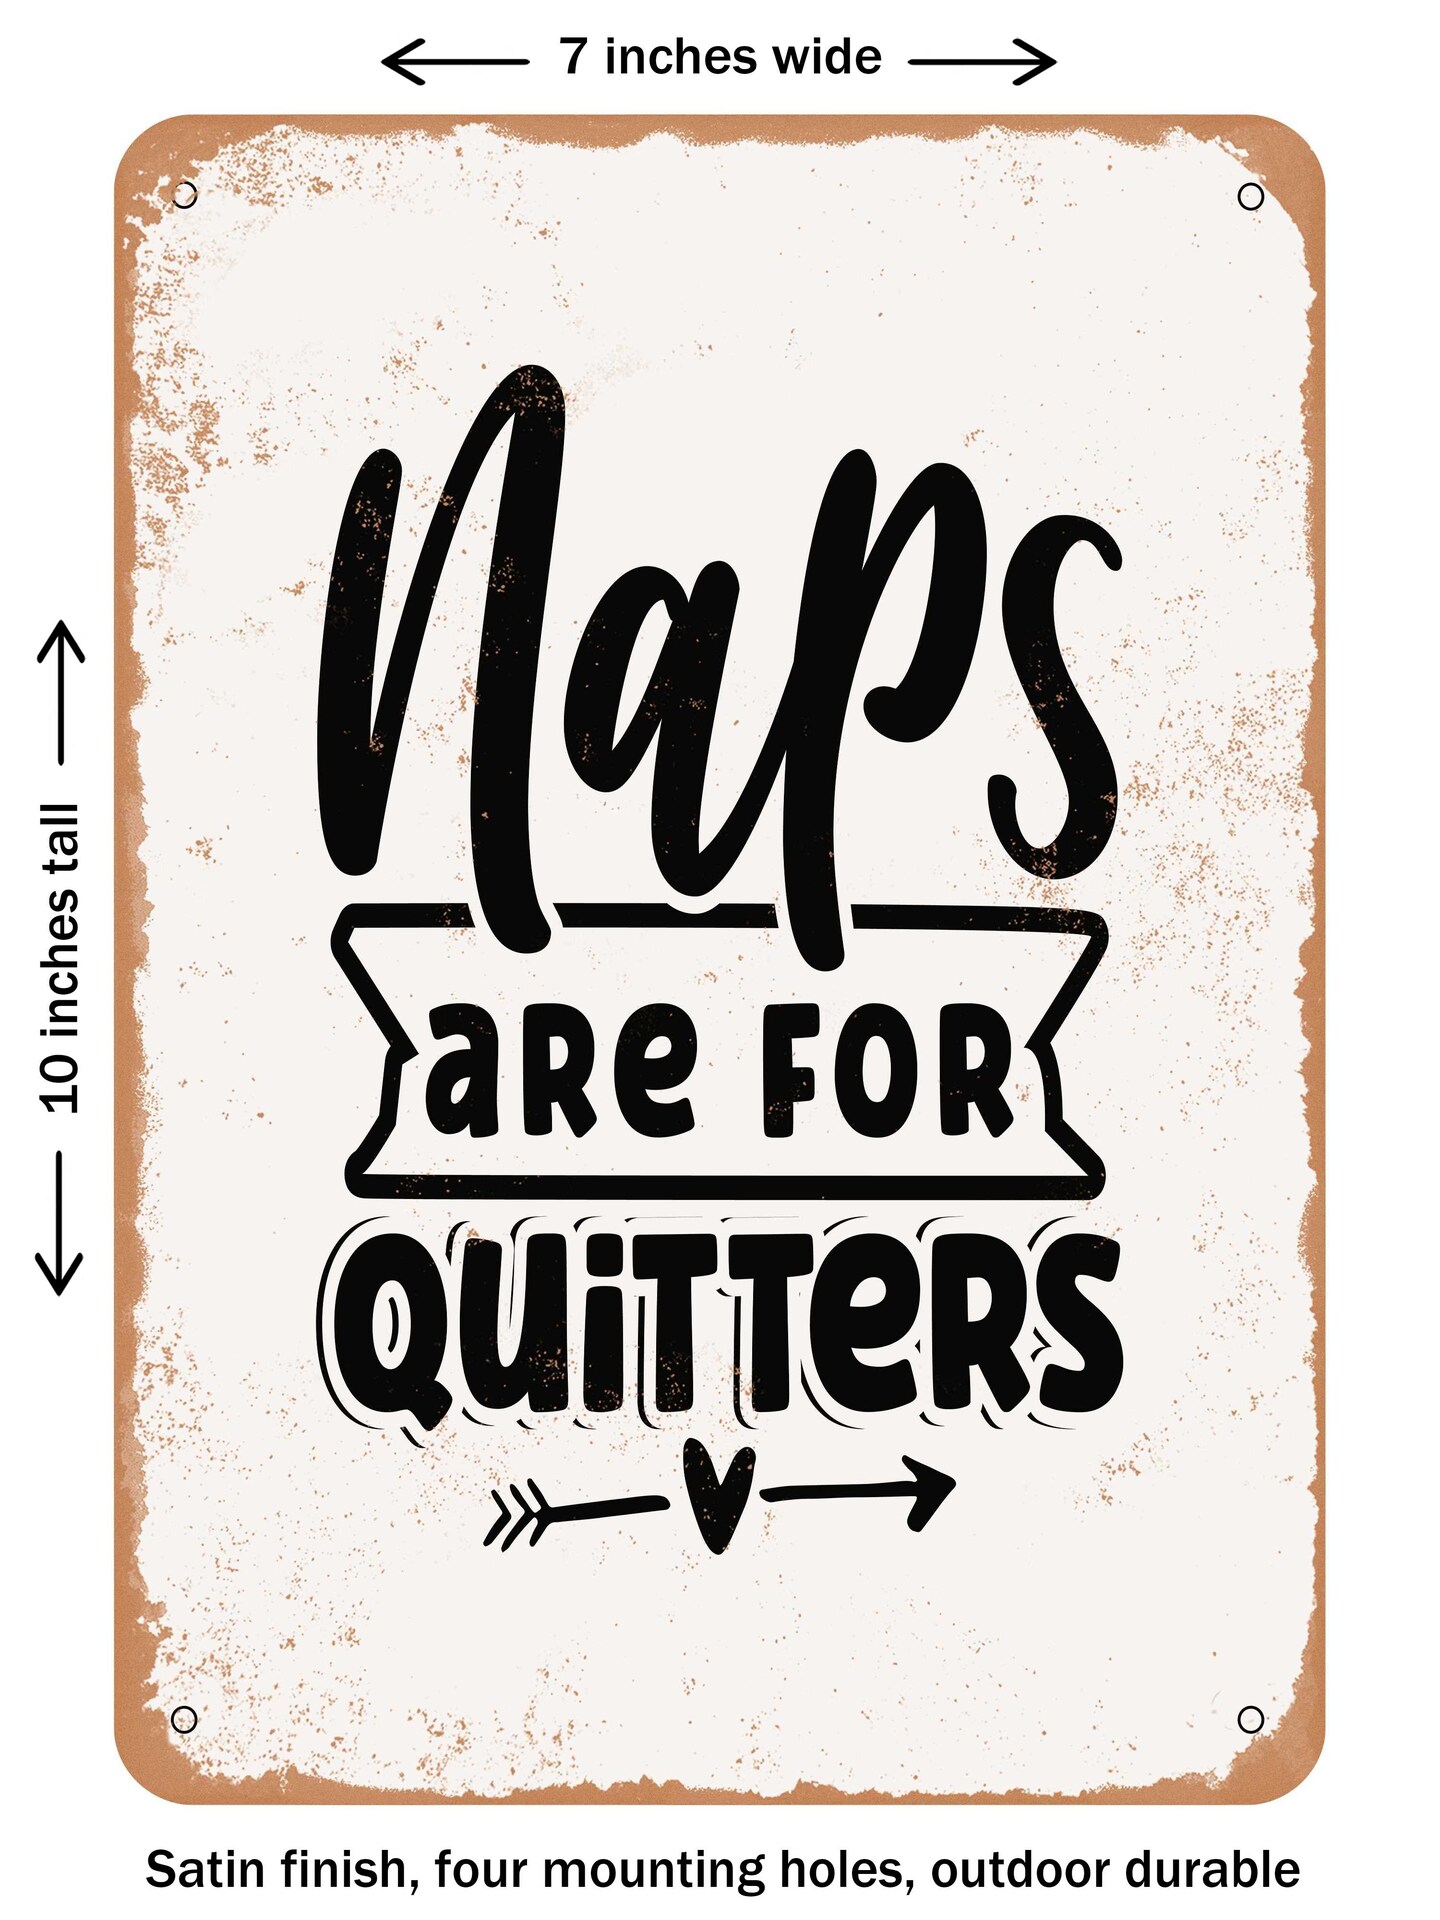 DECORATIVE METAL SIGN - Naps Are For Quitters  - Vintage Rusty Look